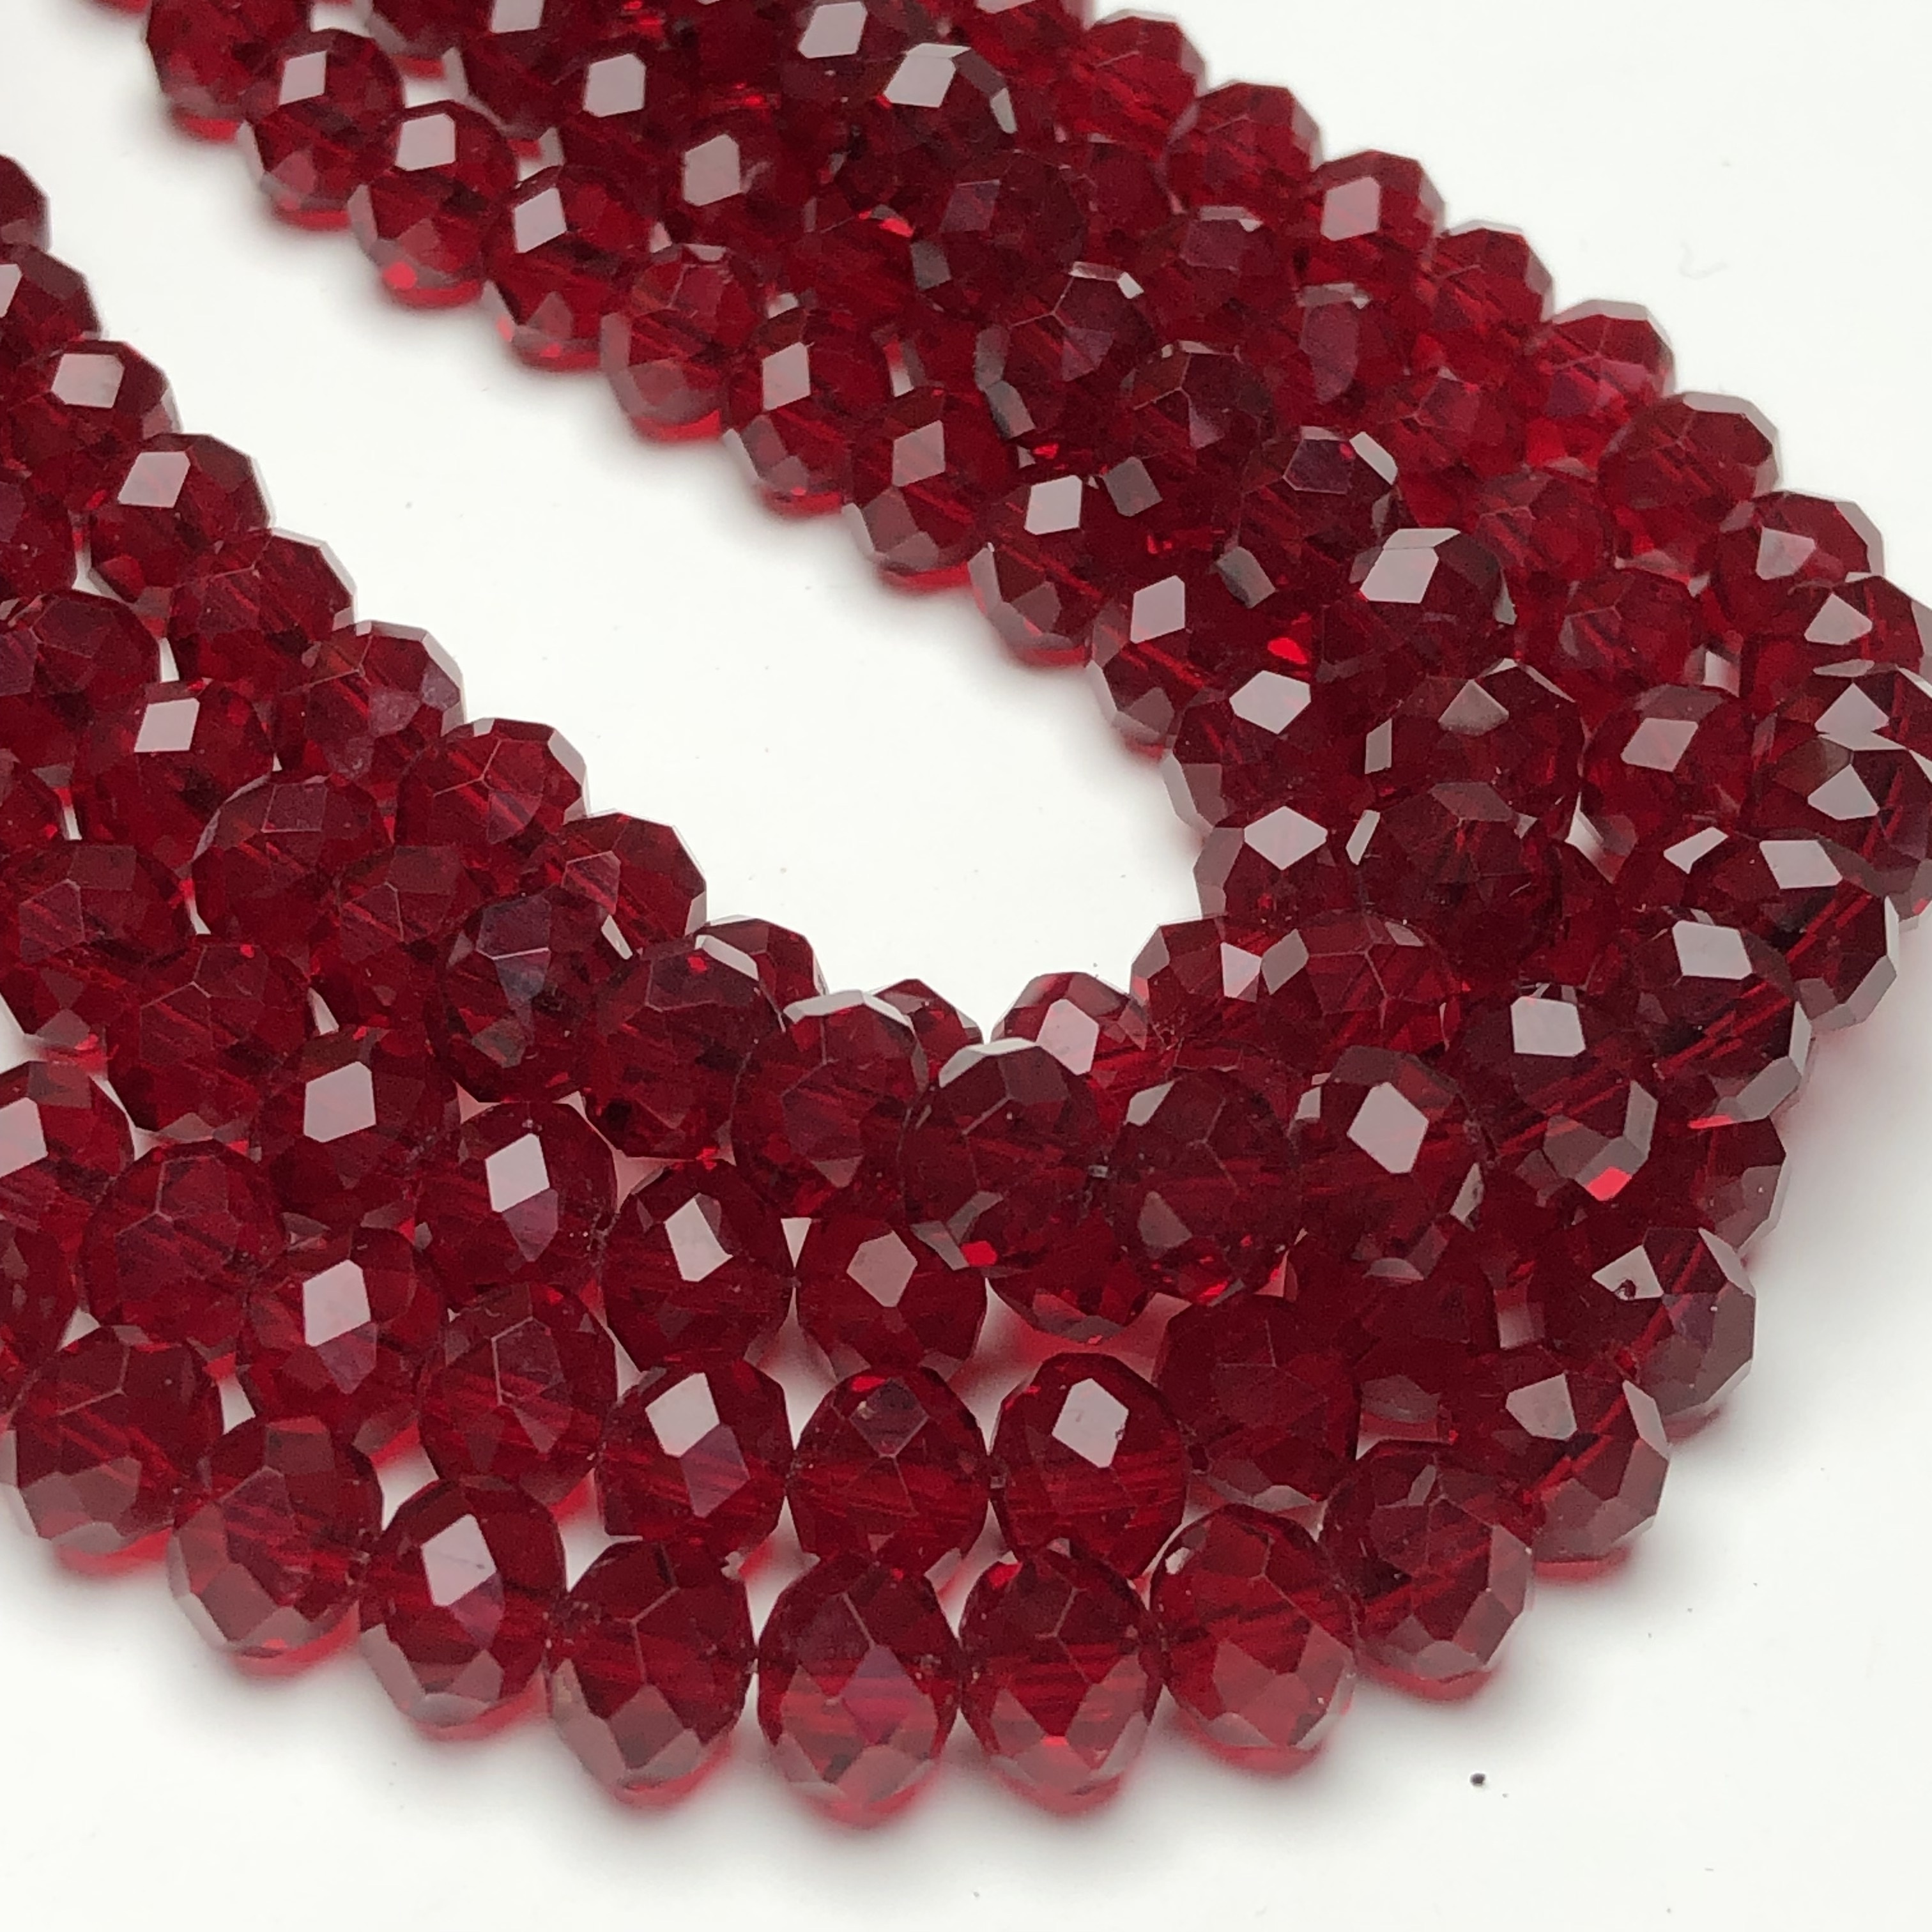 

Faceted Austrian Crystal Glass Beads For Jewelry Making, Artificial Crystal Diy Bead Assortments For Earrings Bracelets, Loose Spacer Beads, Deep Red - 3/4/6/8mm, Bulk Pack